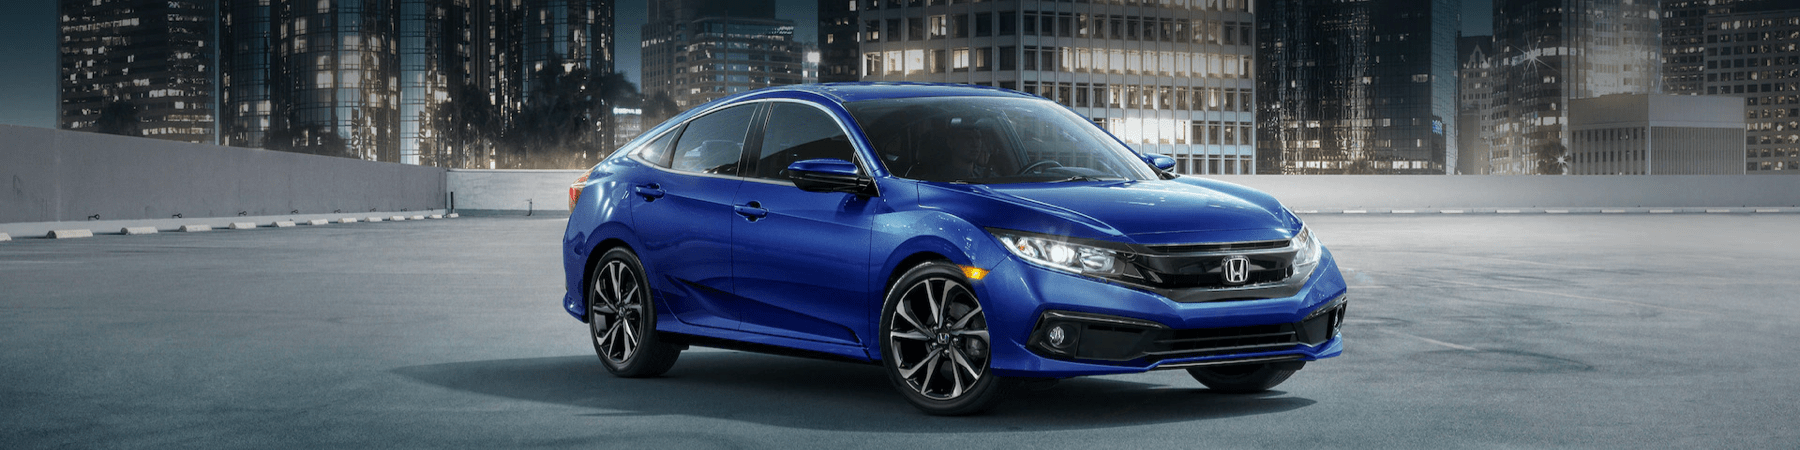 2021-Honda-Civic-Sedan-in-an-empty-parking-lot-in-front-of-an-urban-cityscape-at-night-slim